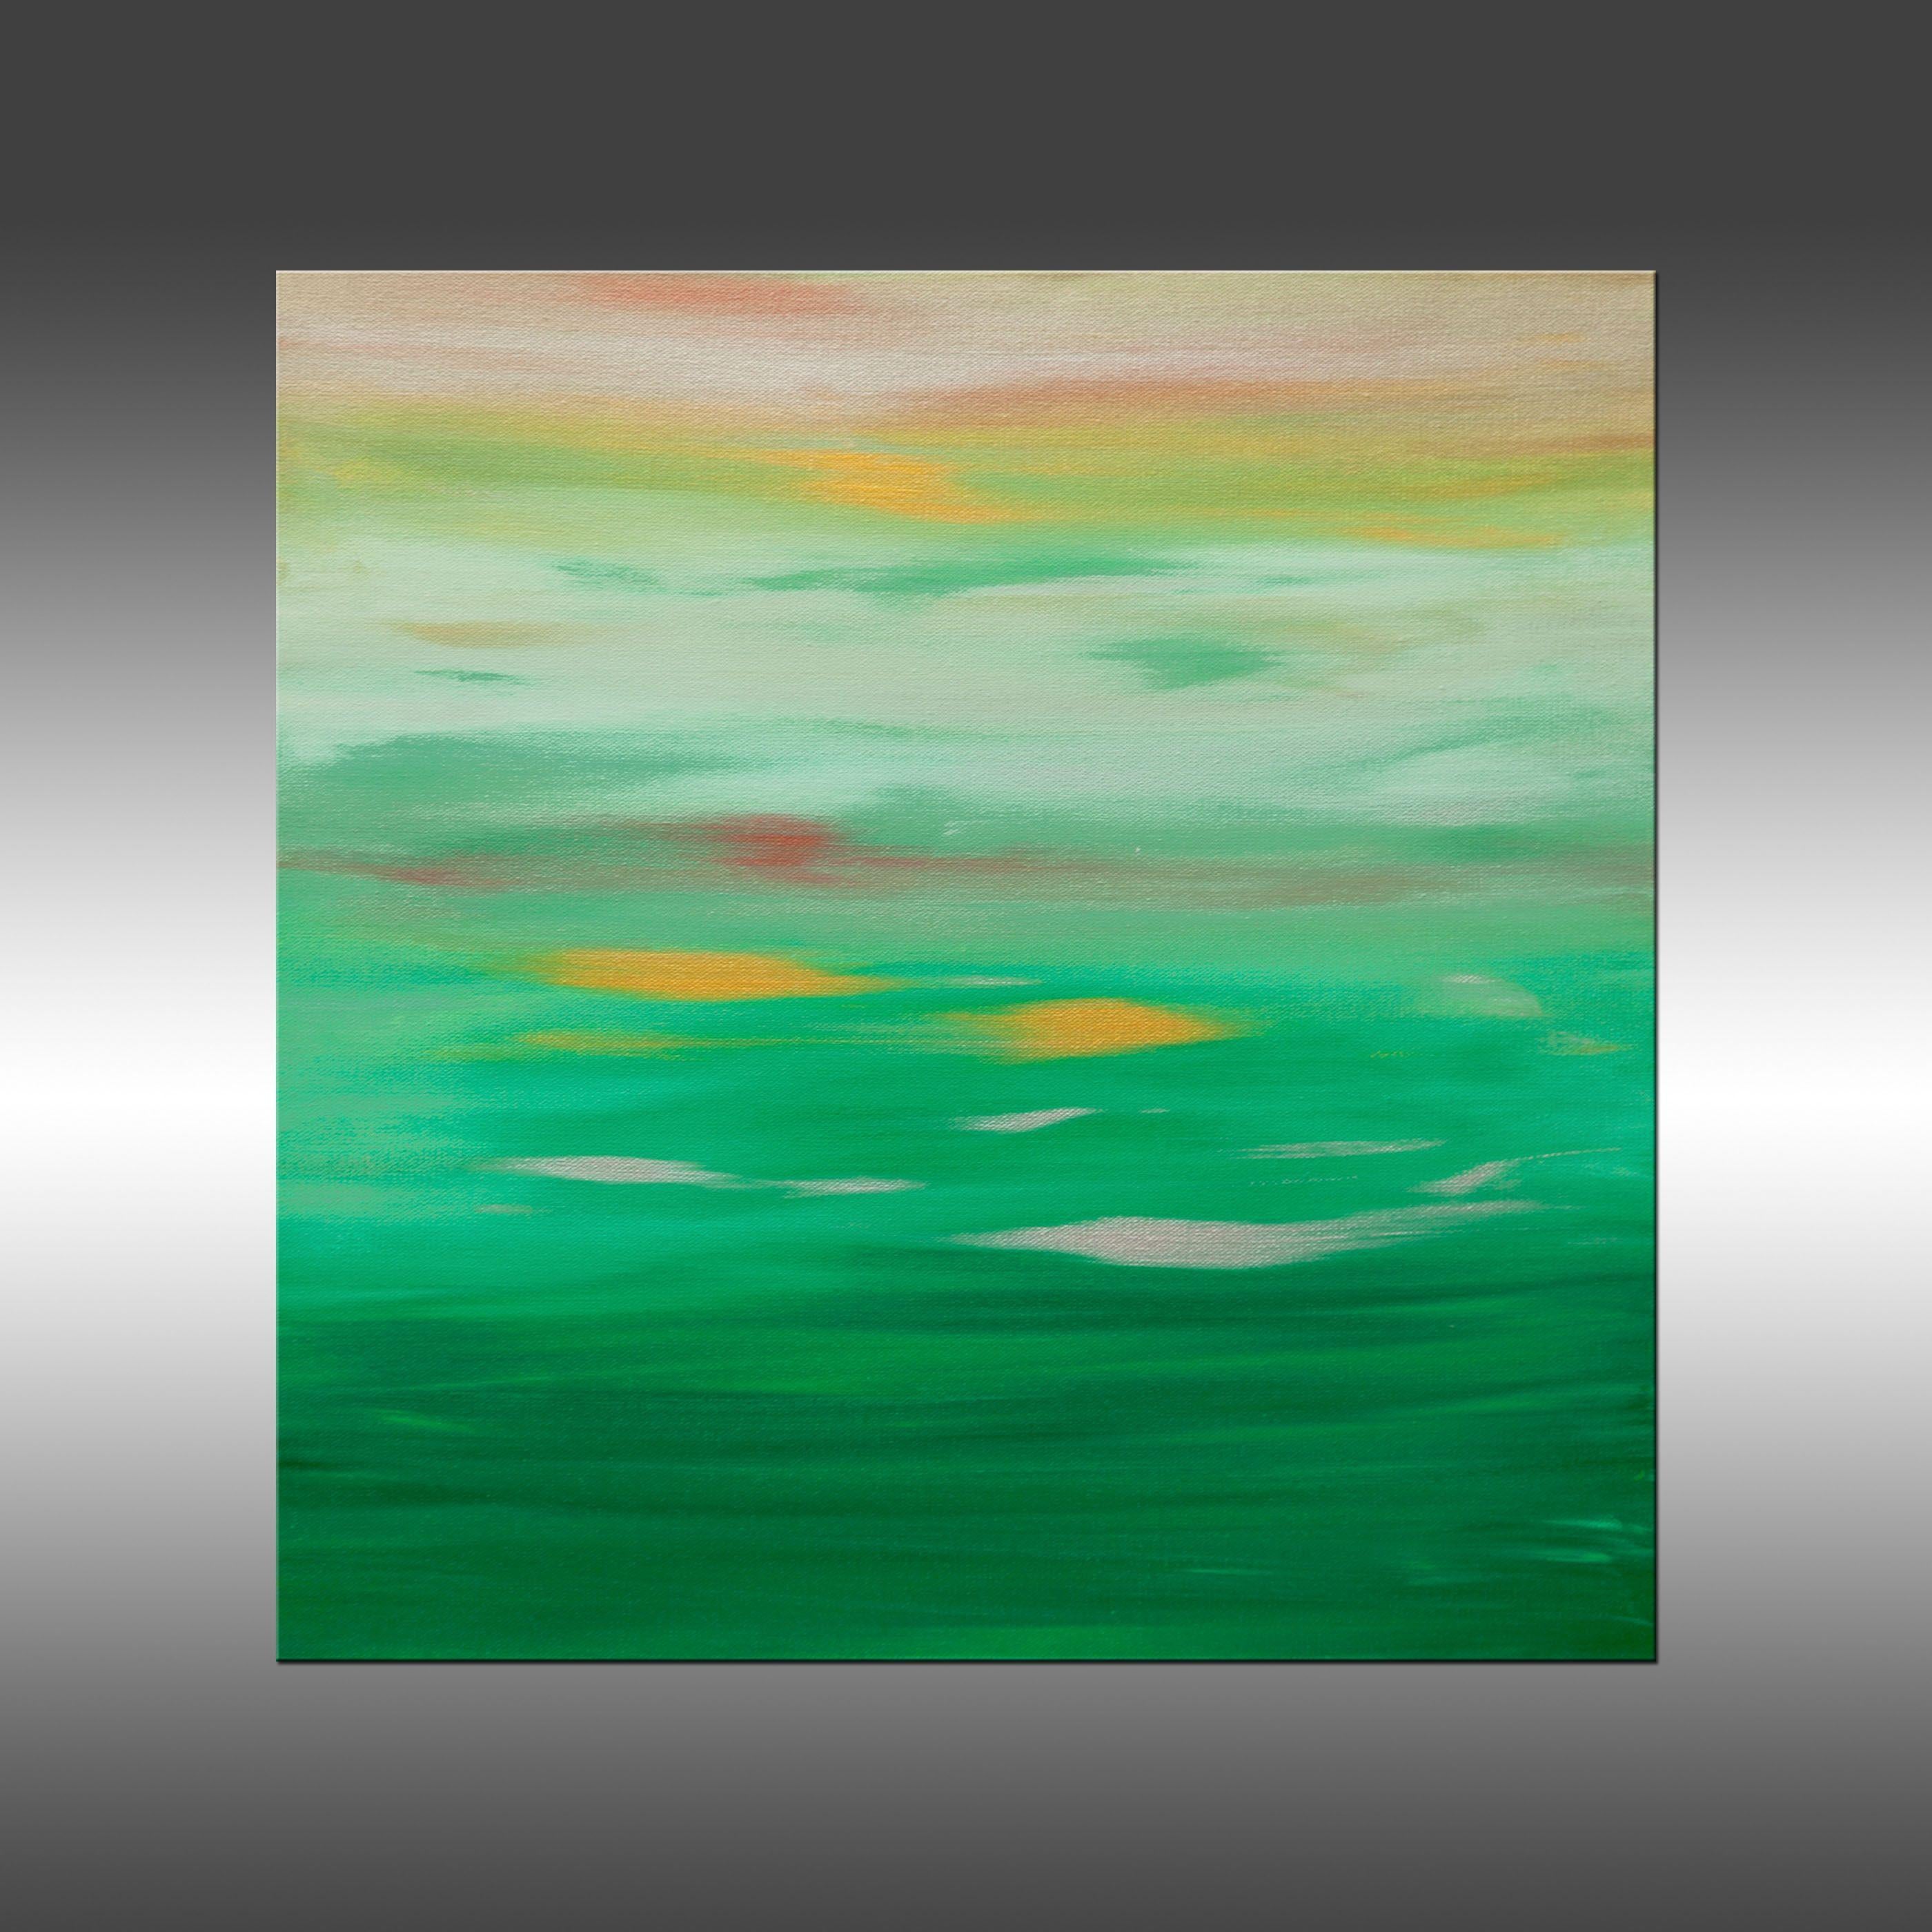 Sunset 68 is an original painting, created with acrylic paint on gallery-wrapped canvas. It has a width of 20 inches and a height of 20 inches with a depth of 1.5 inches (20x20x1.5).    The colors used in the painting are green, off-white, copper,